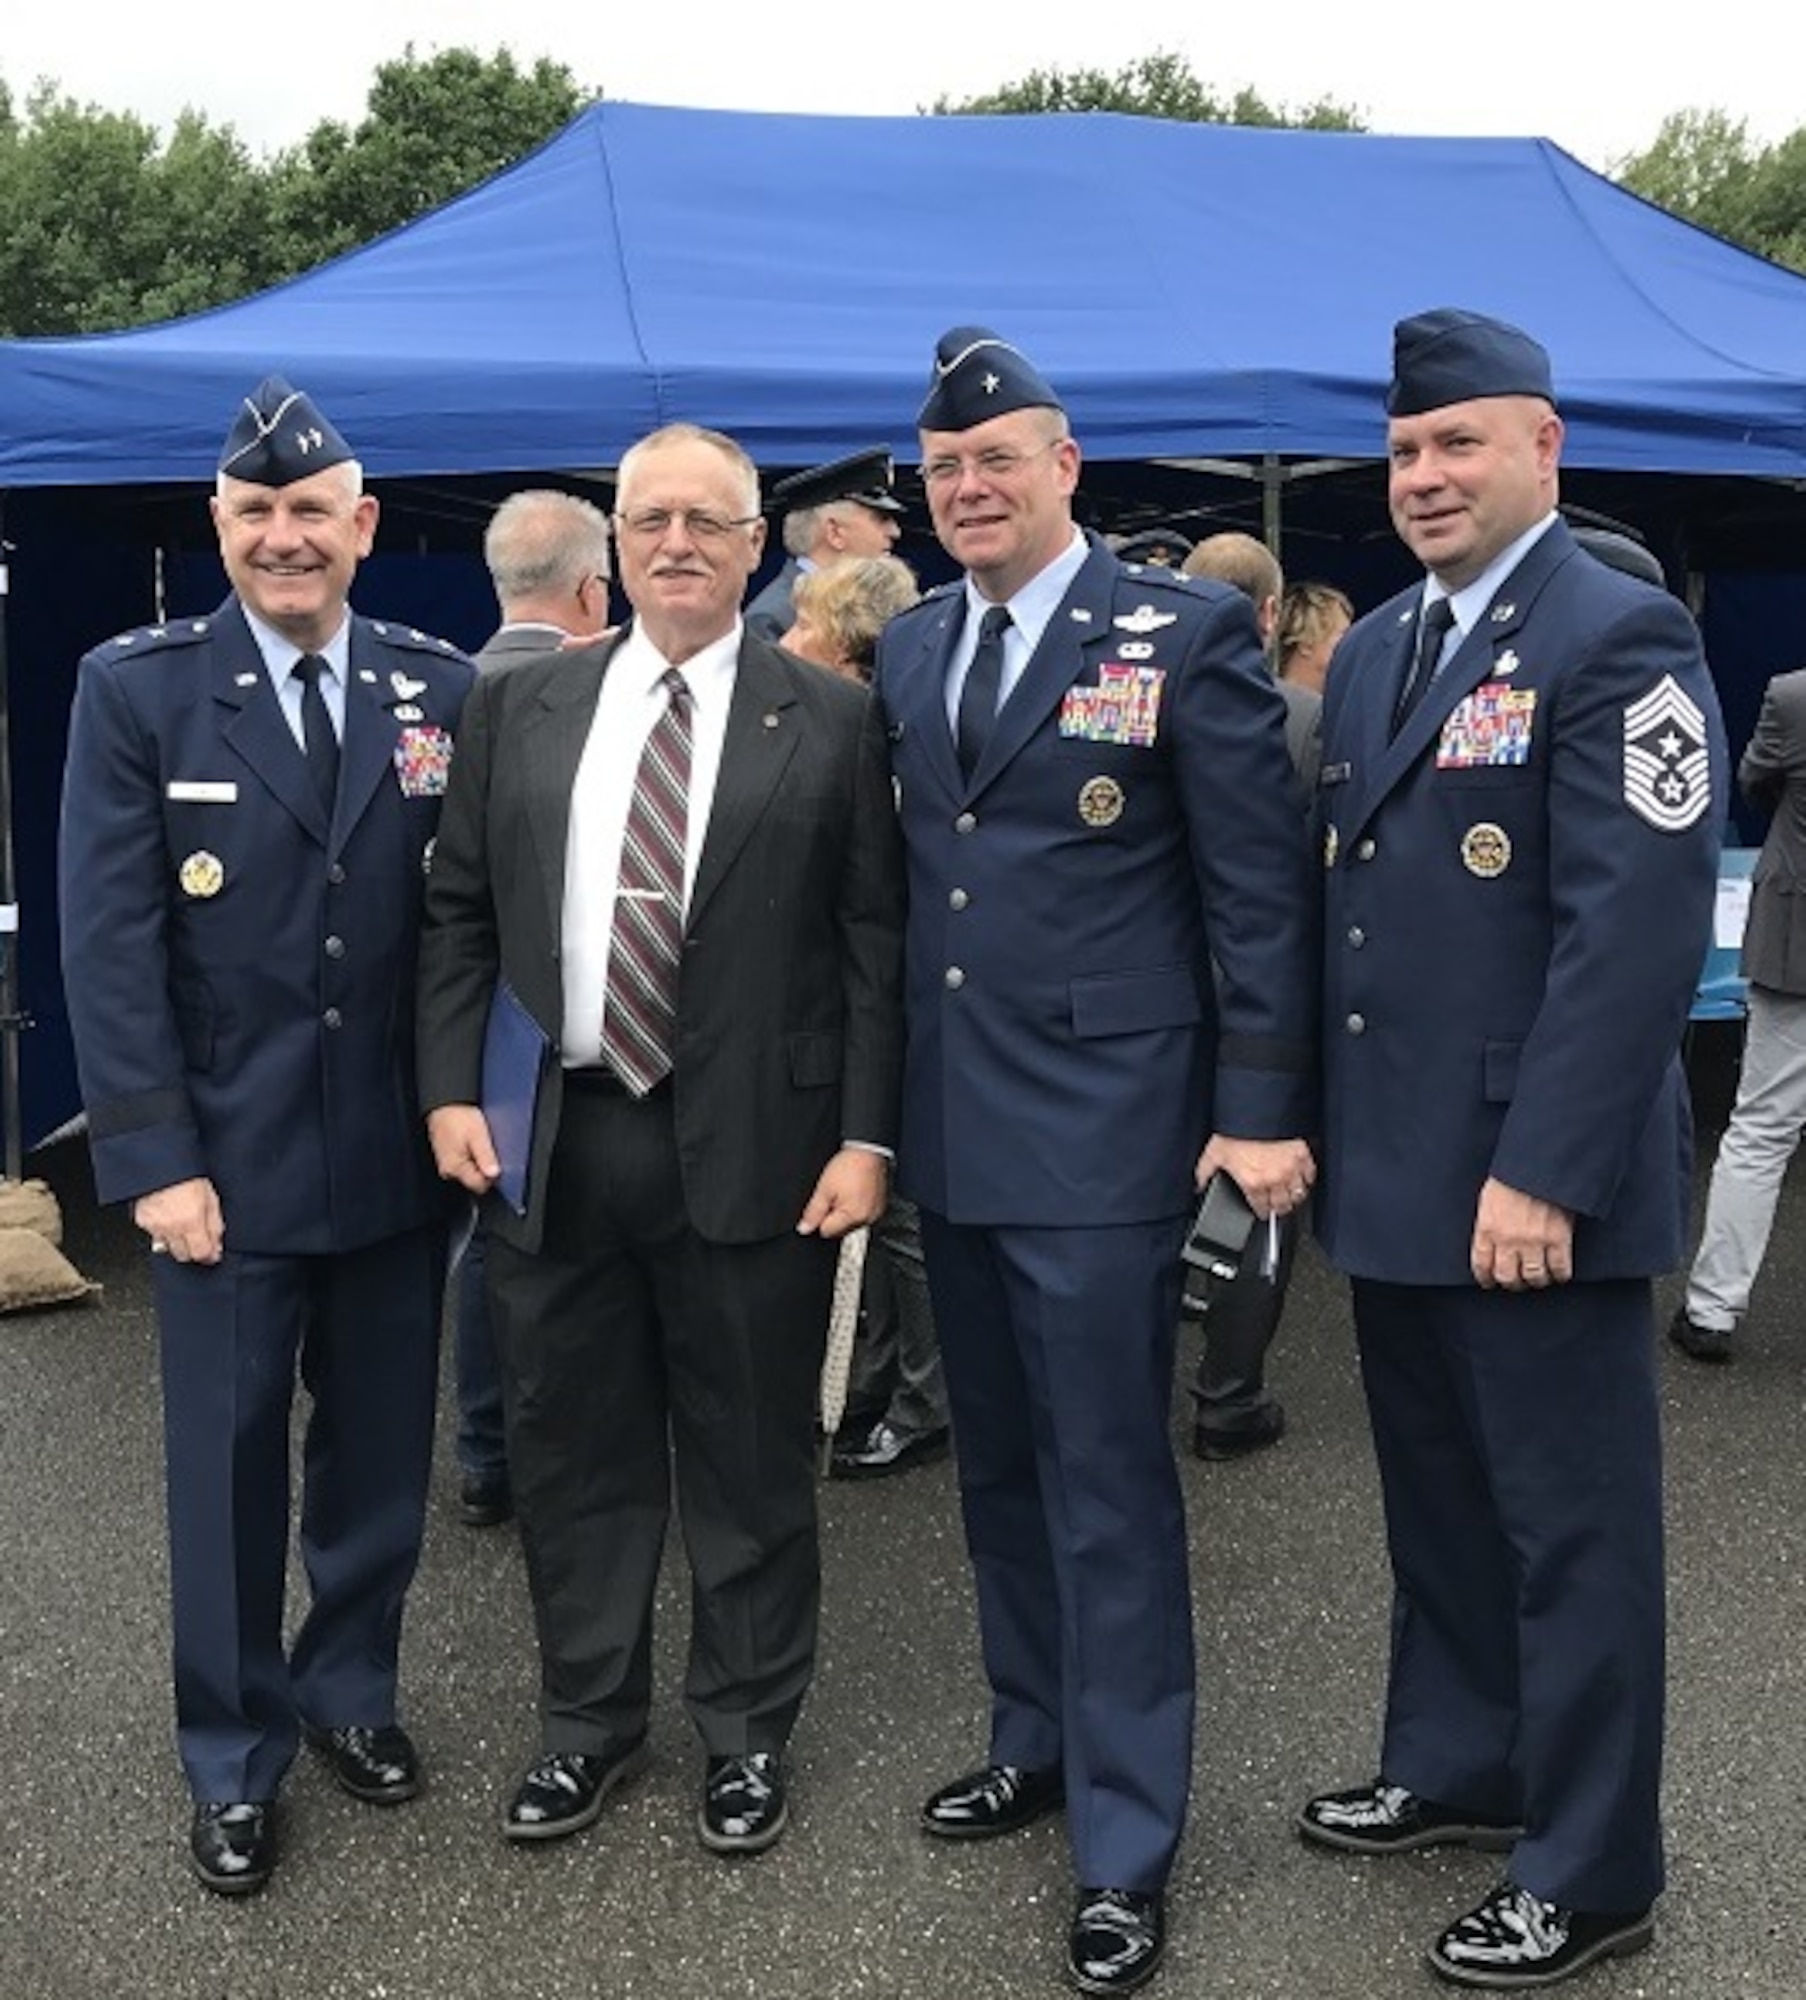 Maj. Gen. Timothy Fay, vice commander U.S. Air Forces in Europe, Dr. Silvano Wueschner, Air University historian, Brig. Gen. Richard G. Moore, commander 86 Airlift Wing and Chief Master Sgt. Aaron D. Bennett, 86 Airlift Wing command, pose for a photo before the dedication of memorial for Royal Air Force Squadron leader Roger Bushell and French Air Force 2nd Lt. Bernad Scheidhauer, July 1, 2017, outside Ramstein, Germany.  Both men were part of the “Great Escapees,” who were executed by the Gestapo on March 29, 1944 near present-day Ramstein Air Base. (U.S. Air Force photo by Staff Sgt. Timothy Moore)